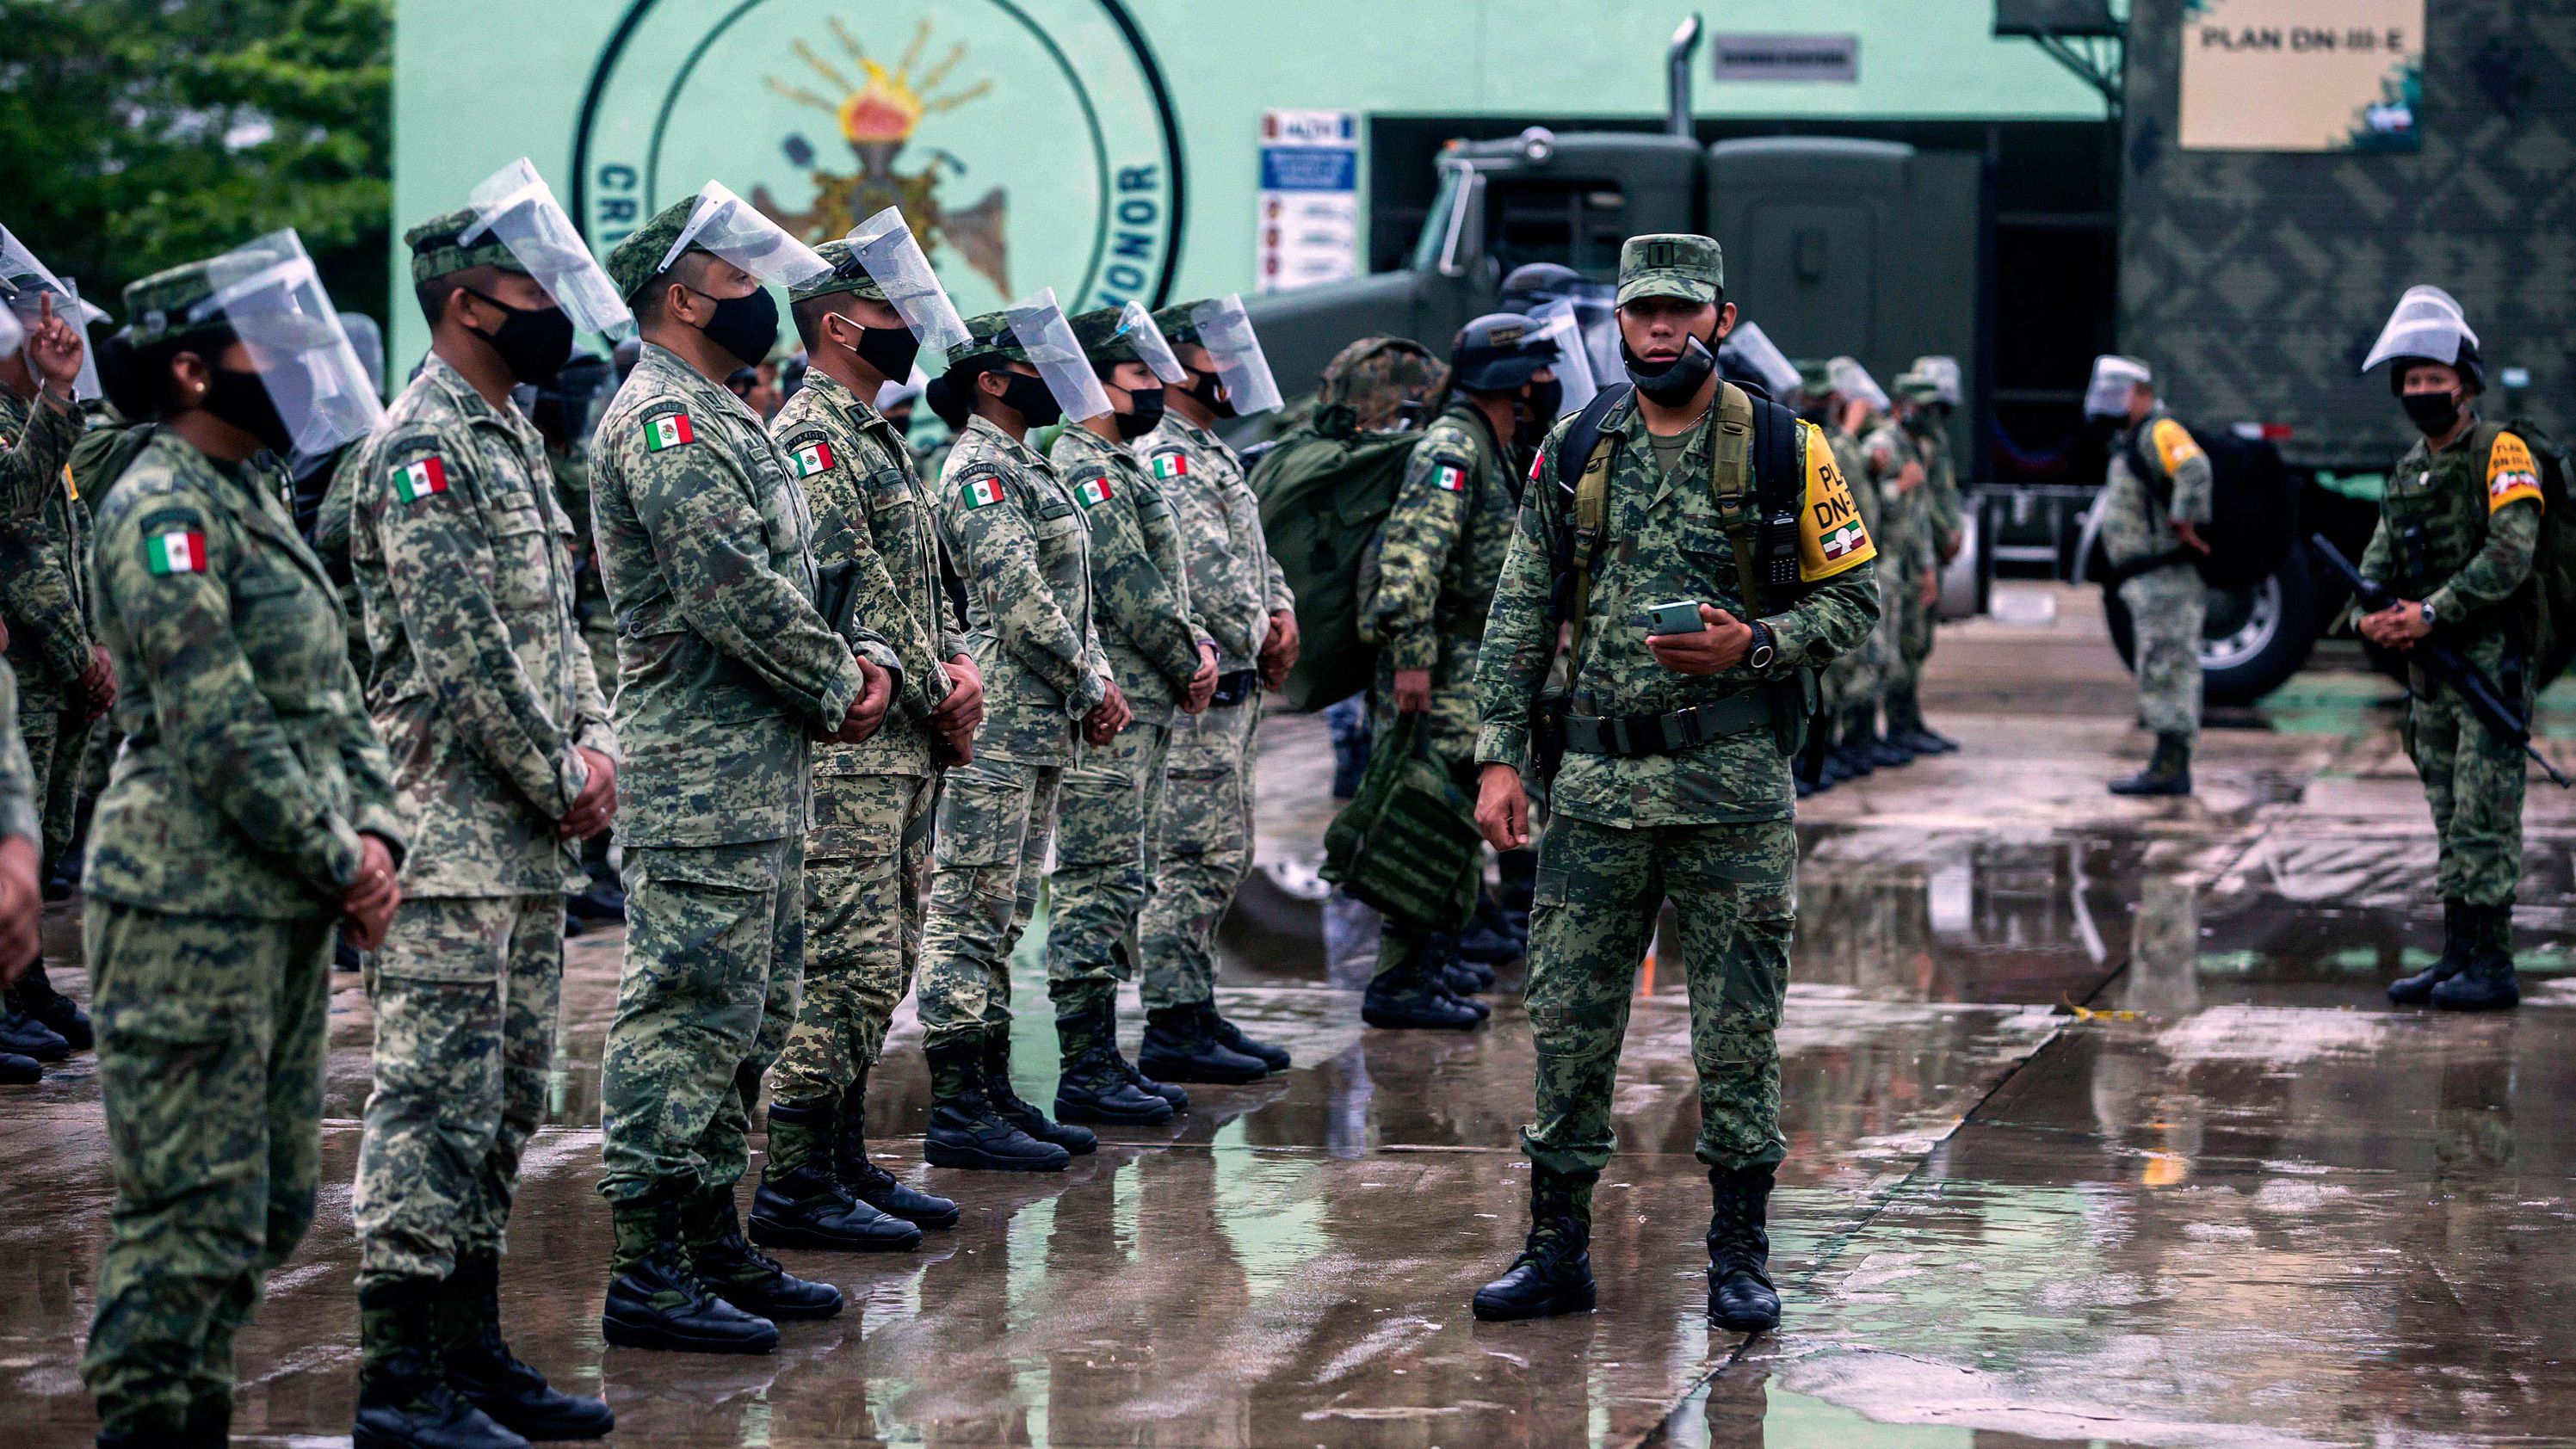 Members of the Mexican Army prepare to move towards the municipalities of Valladolid and Tizimin, in Merida, Yucatan state, in preparation for the arrival of Hurrican Delta on October 6.